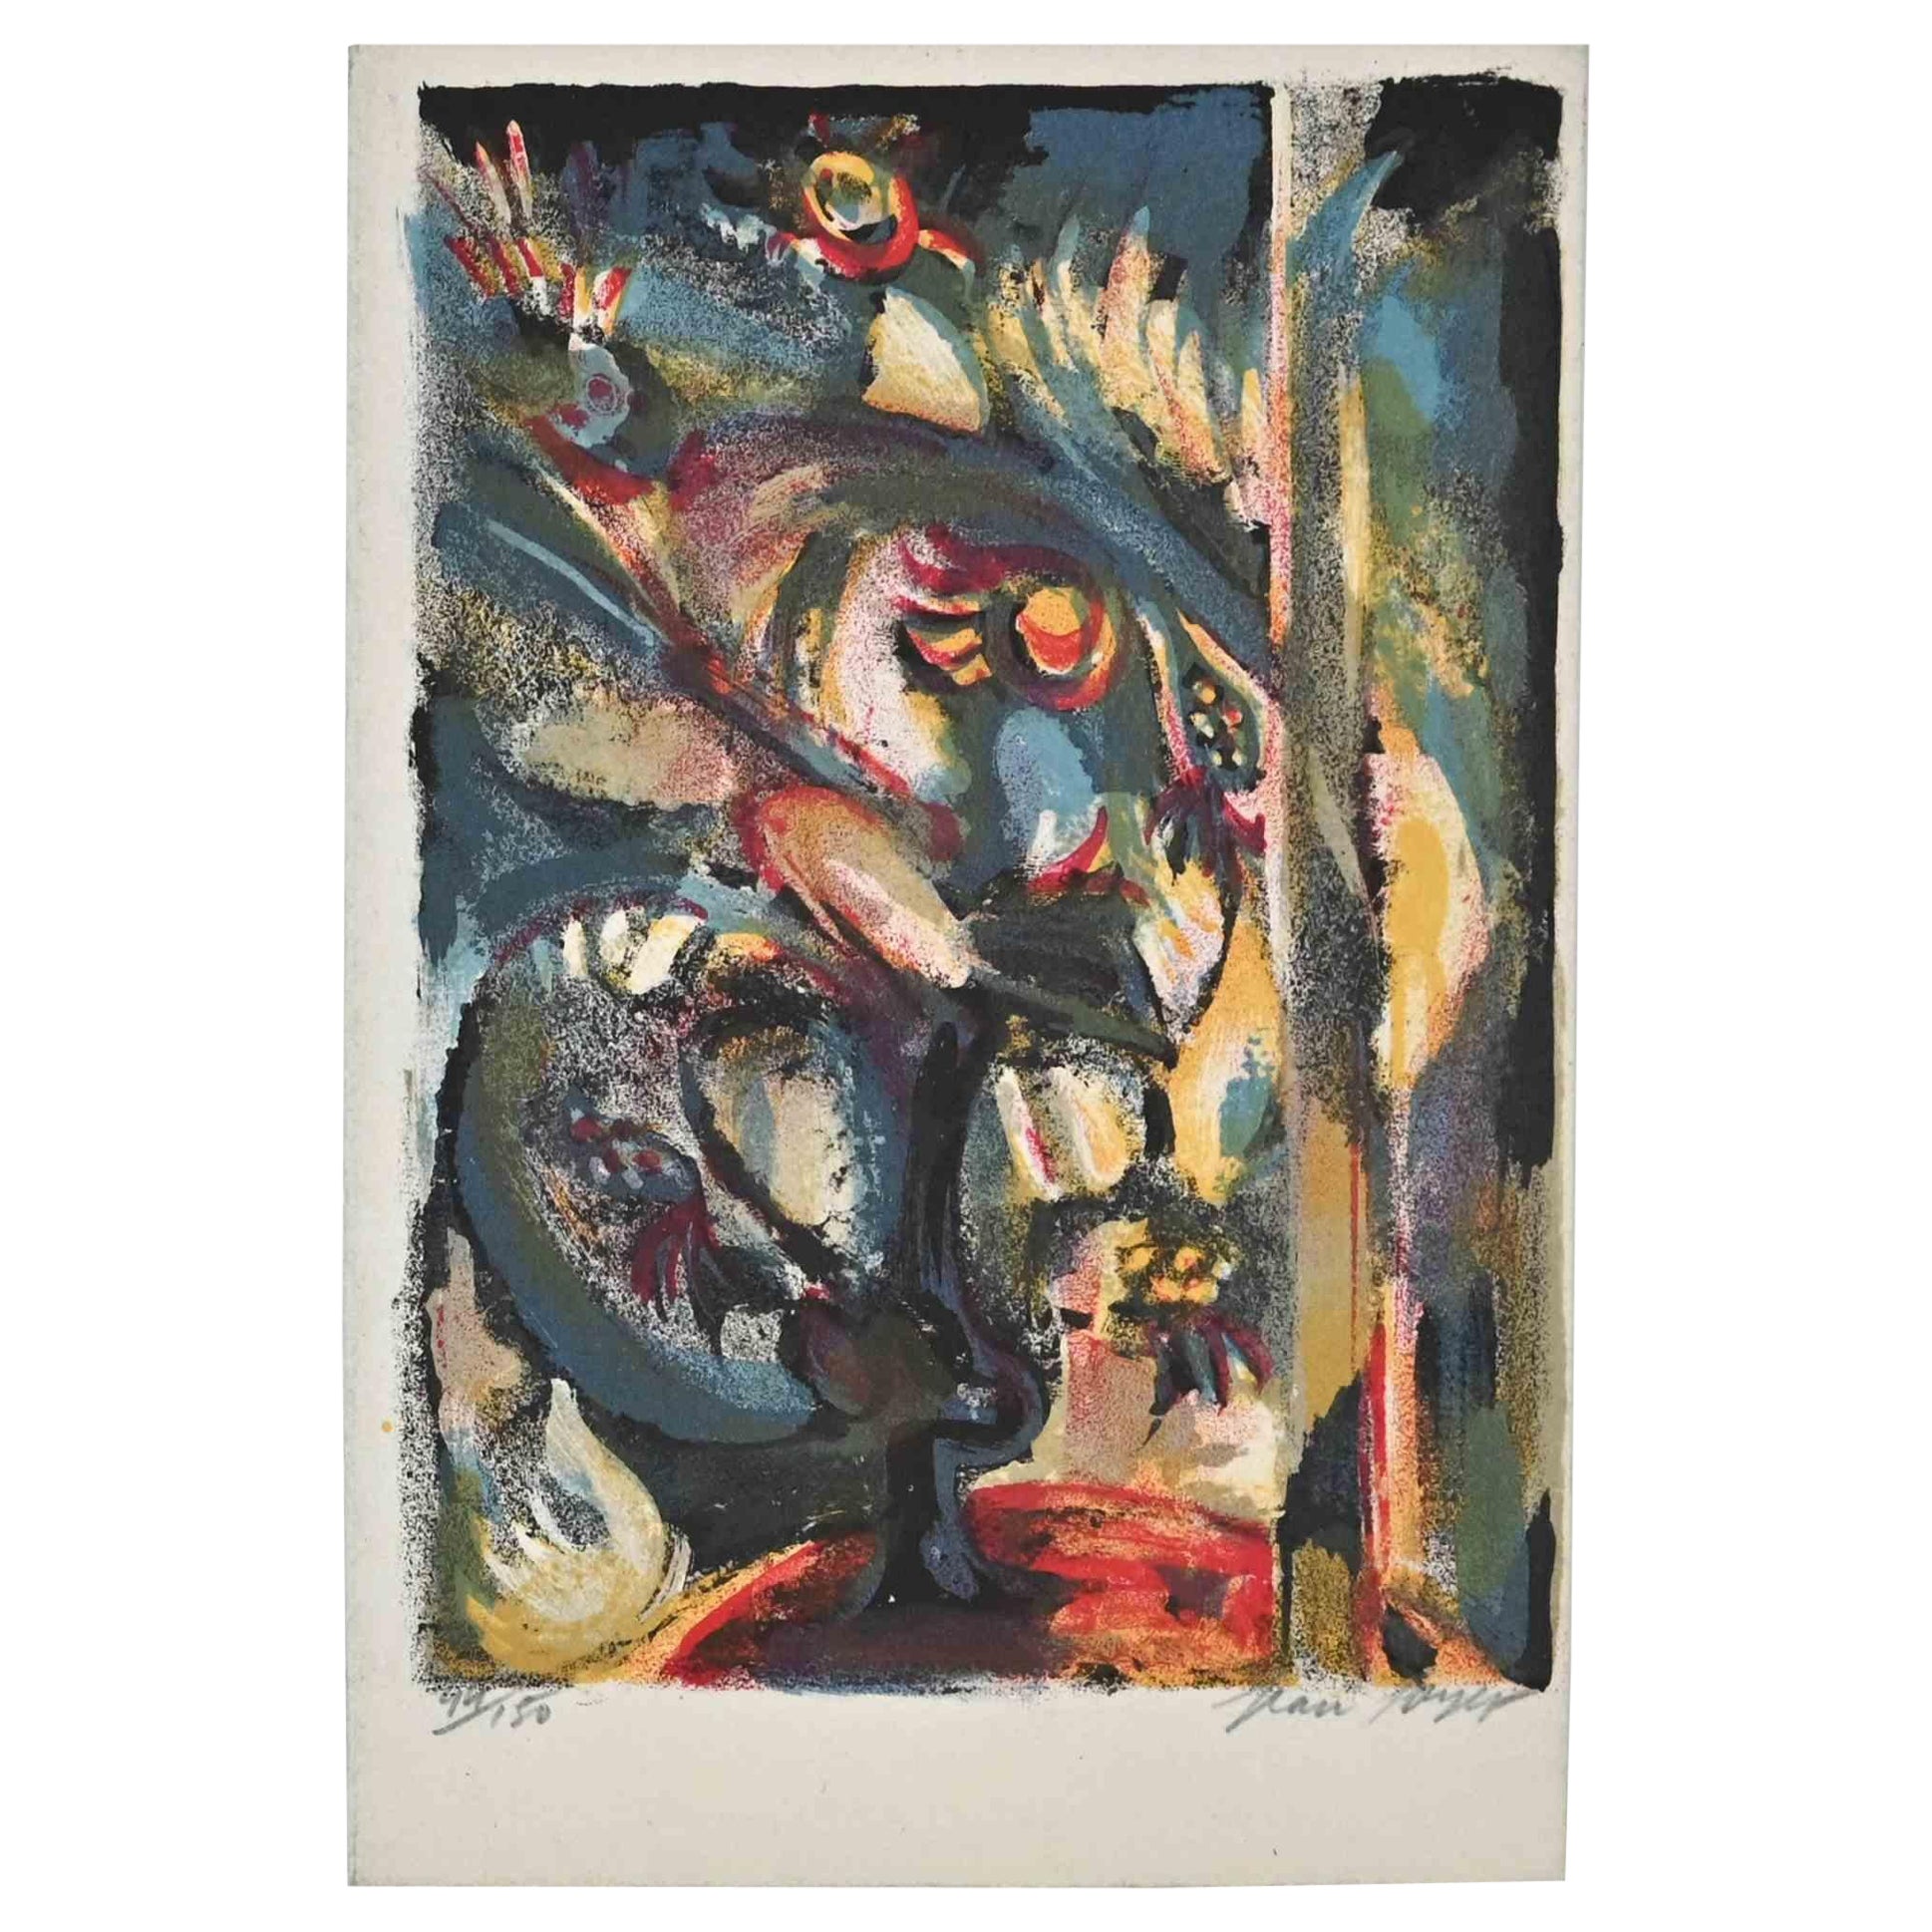 Abstract Composition is a lithograph on paper realized by Jean Joyet (21 June 1919 – 14 April 1994), a French painter in the 1950s.

Hand-signed on the lower.

Numbered, edition of 99/150 prints.

Included a Greem Passepartout.

The state of